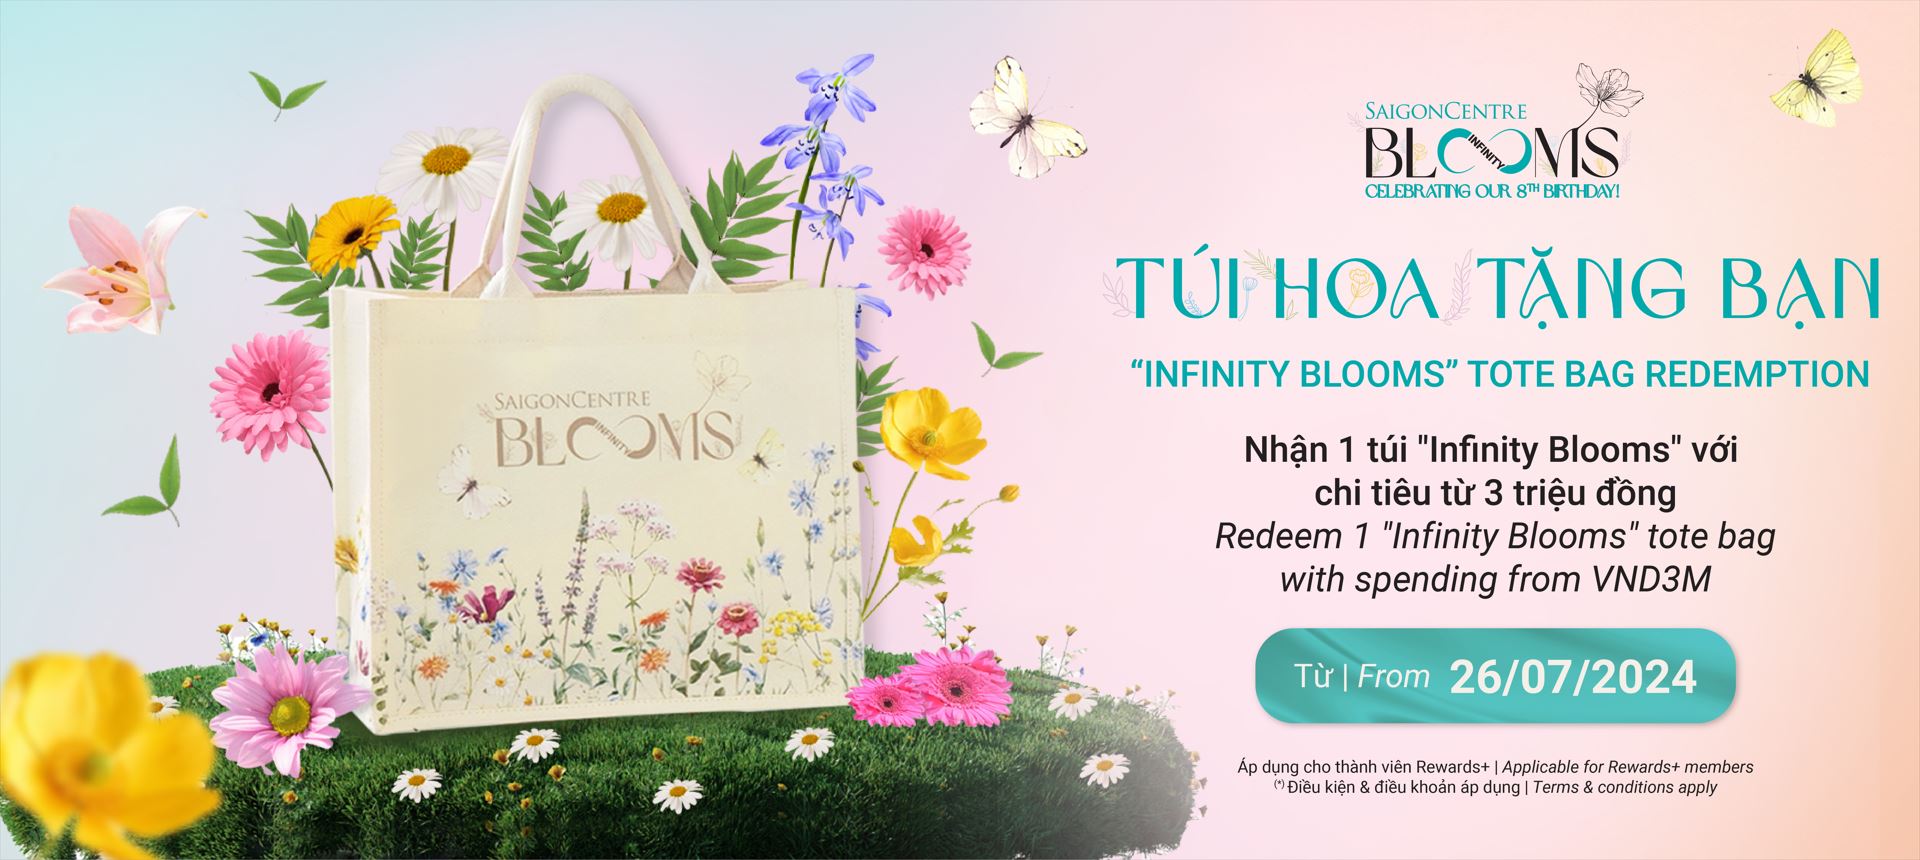 "INFINITY BLOOMS" TOTE BAG REDEMPTION